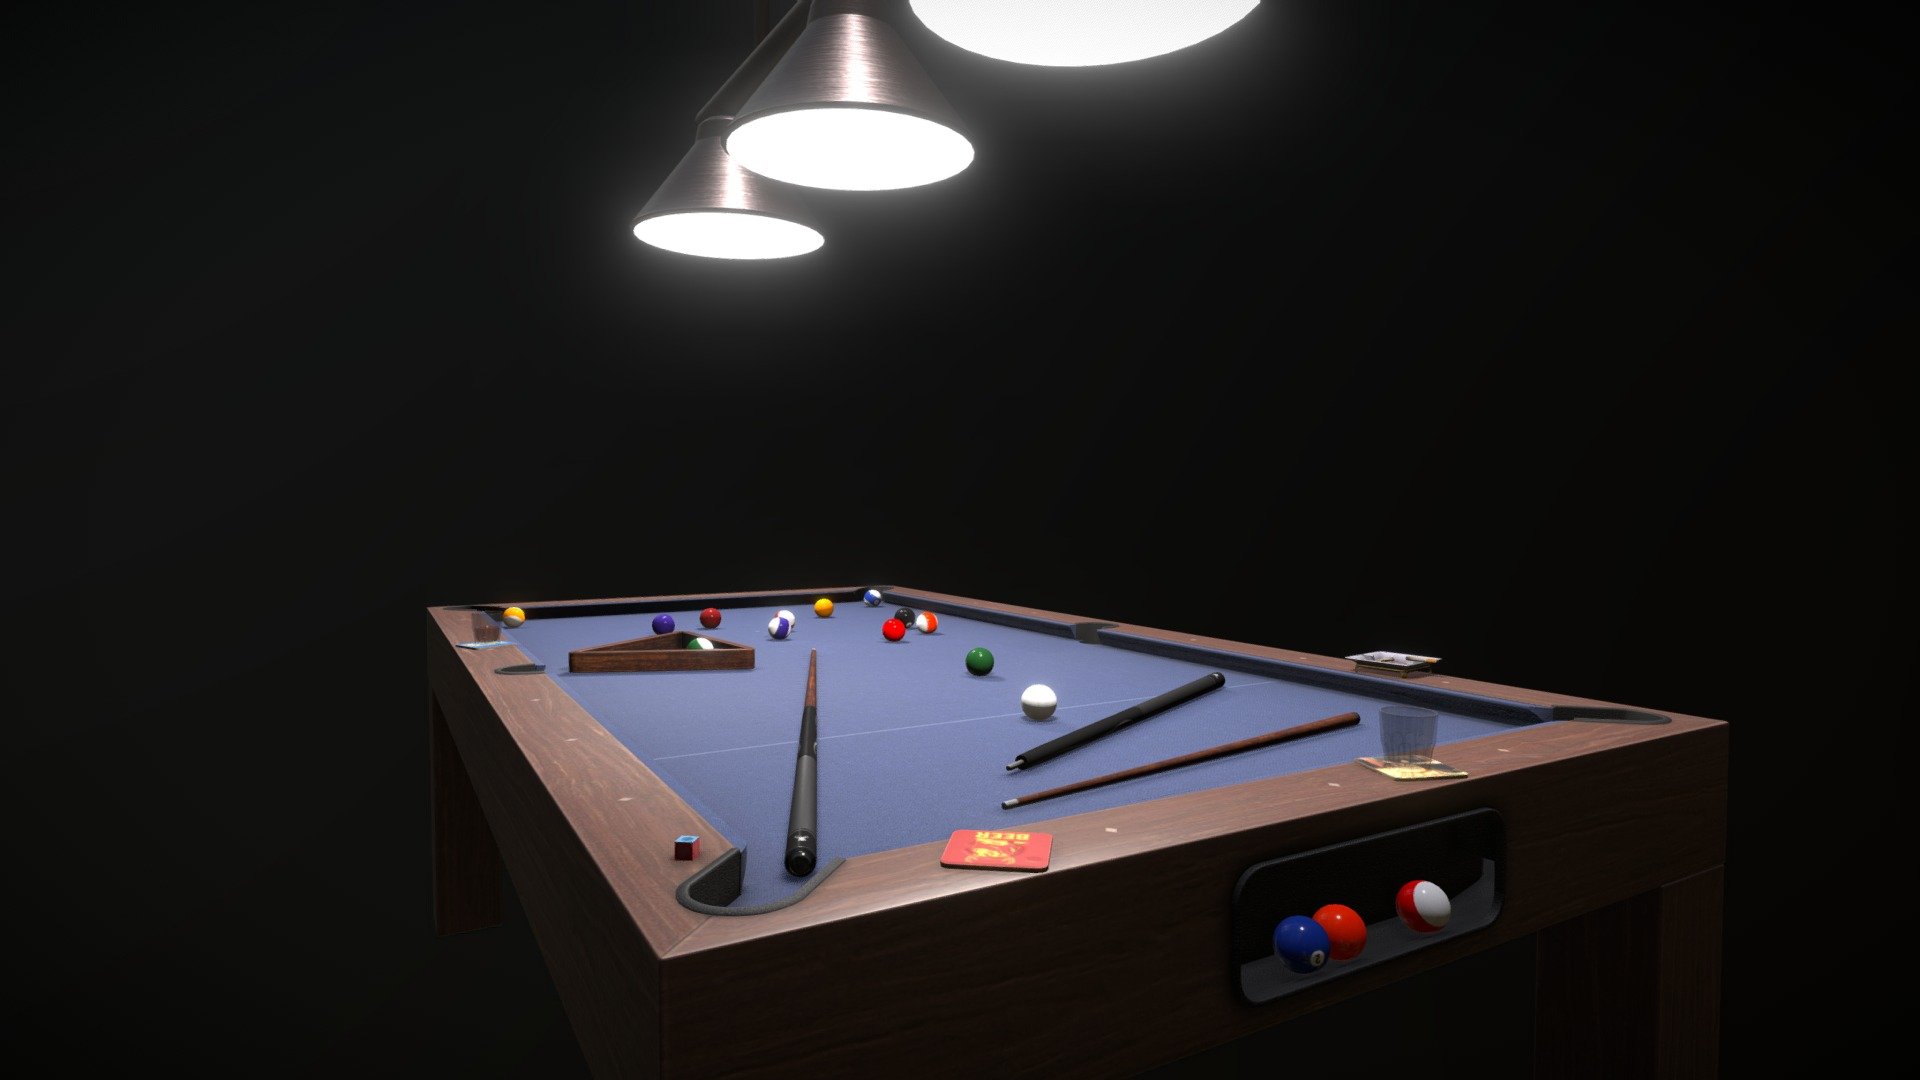 -Info: Pool table set. Includes: Table; Balls x16; Cue; Disassembled cue; Cue chalk; Wooden triangle; Empty glass; Full glass; Coasters x3; Ash tray; Lights.

-Demo: In-engine UE4 screenshot of this asset can be viewed here: Click here

-Type: Game Assets; Low-poly assets; Hero prop.

-Lightmaps: Yes

-LOD's: No

-Workflow: PBR

-Additinal info: Archive includes original .PSD texture files and meshes in .FBX file format 3d model